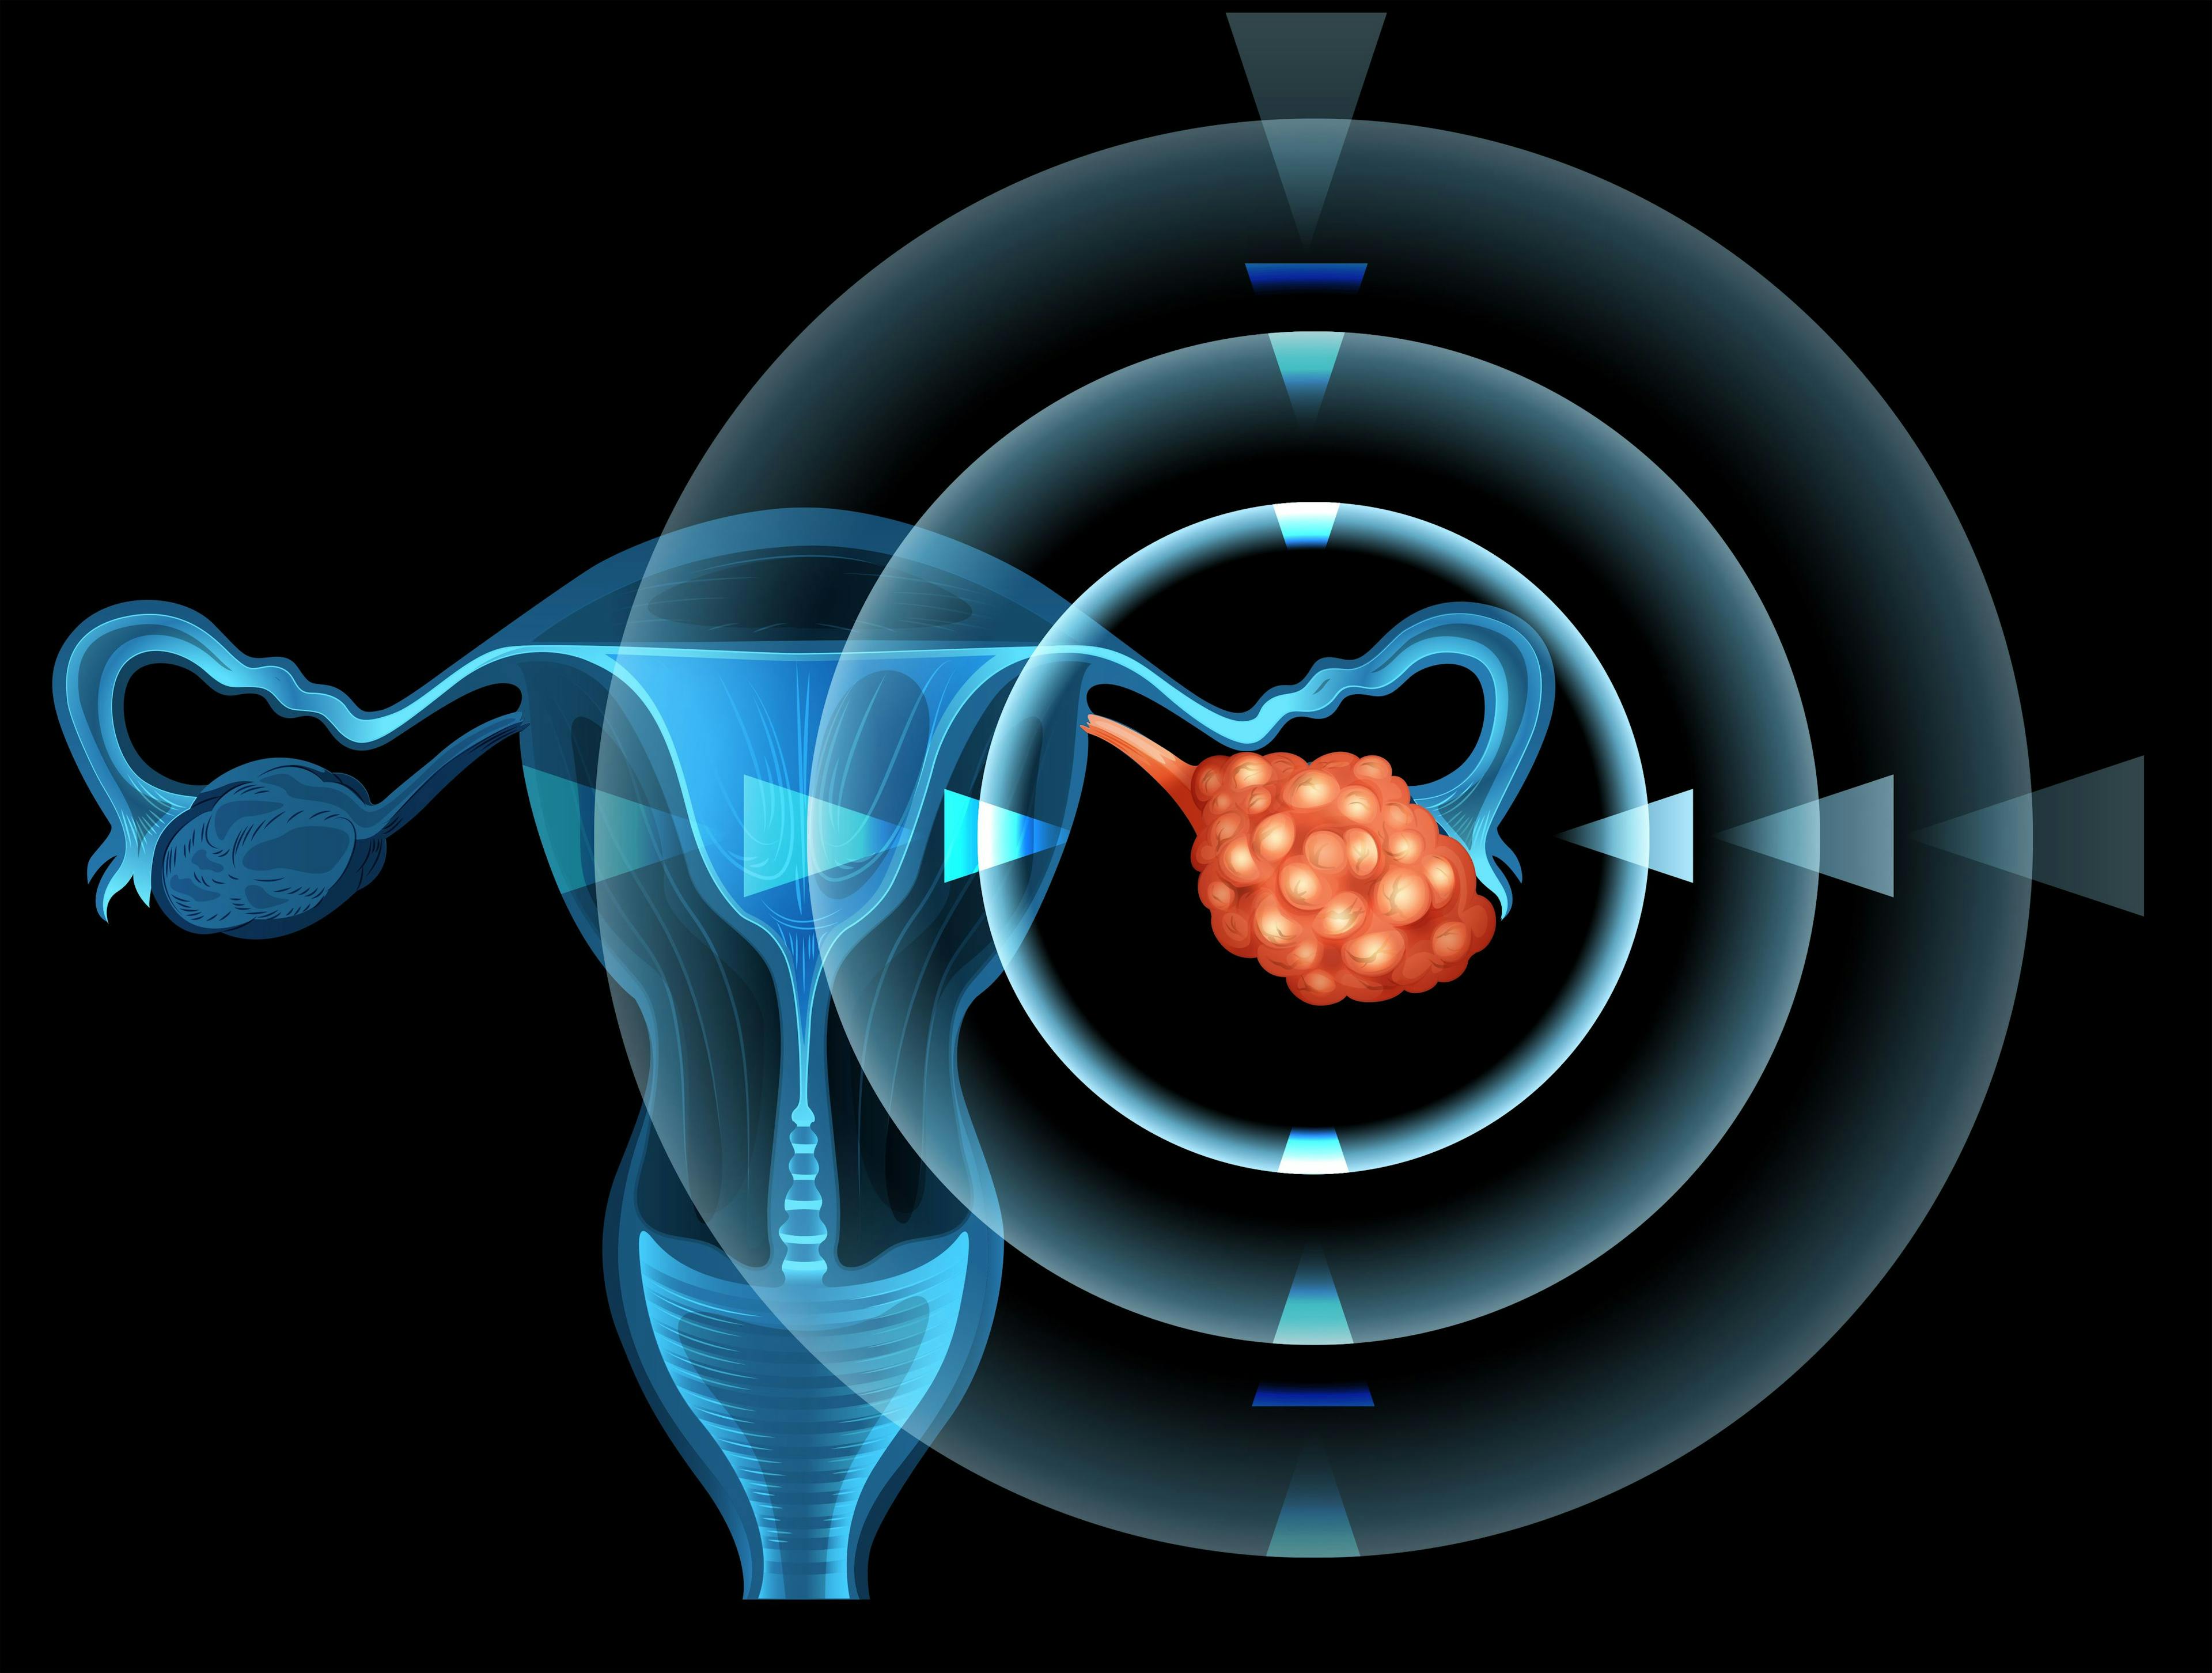 Fallopian Tube Removal Not Associated With Ovarian Cancer Risk